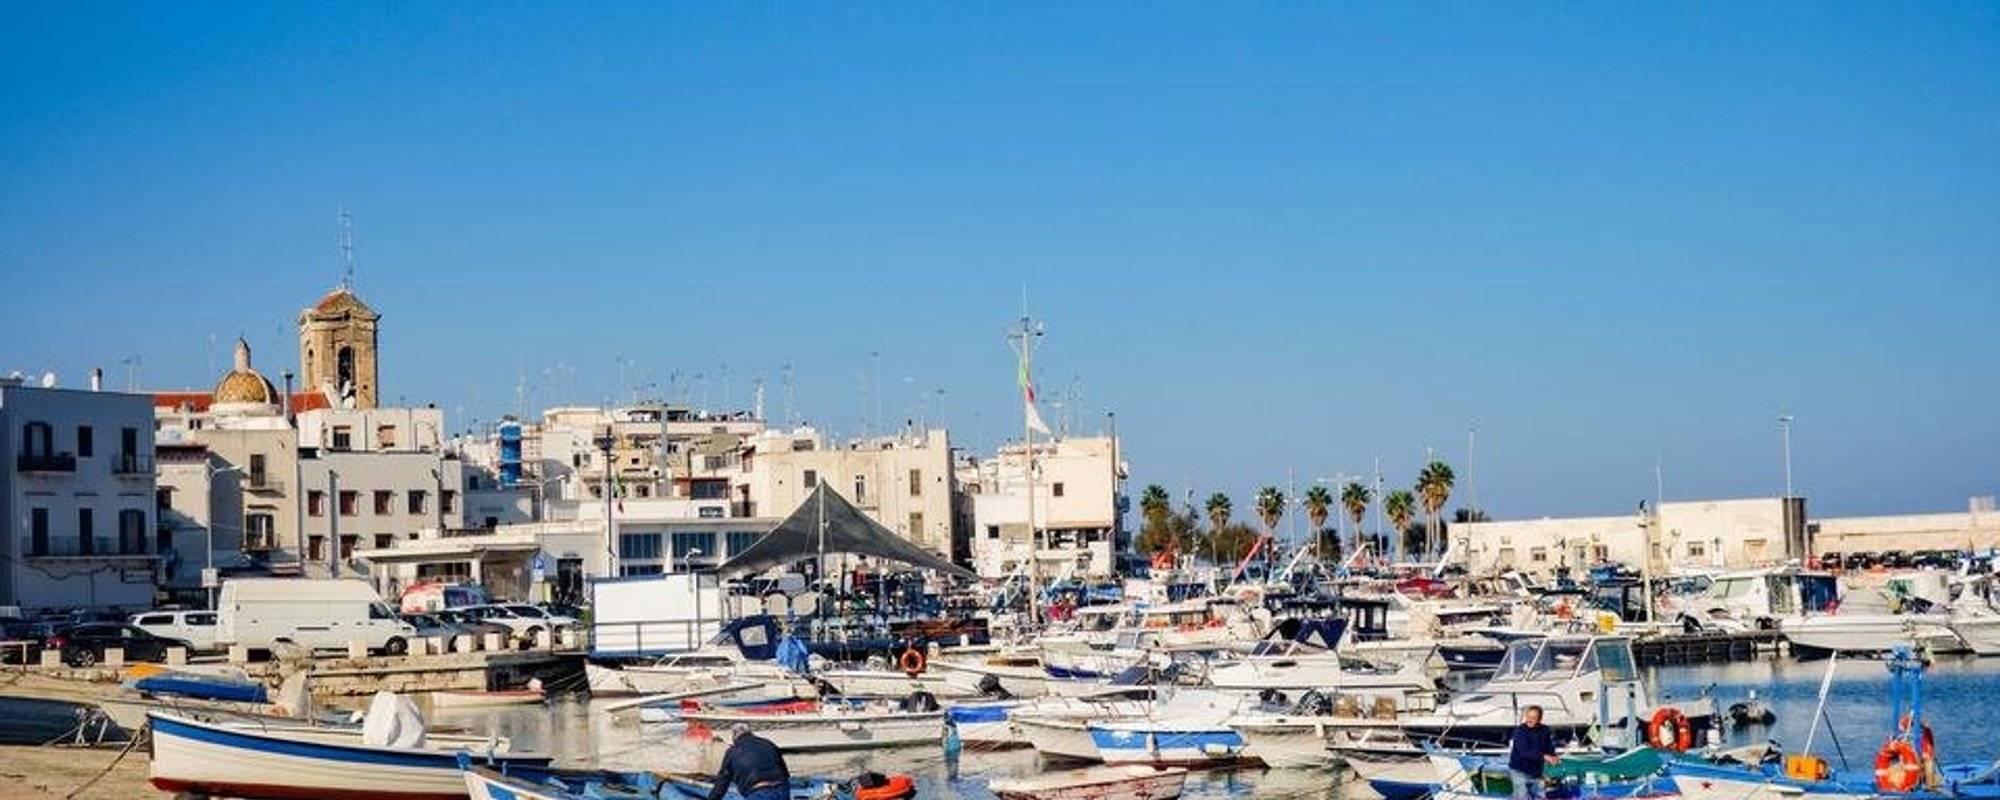 The town of Mola di Bari (Italy): a fishermen's village and more (part TWO).